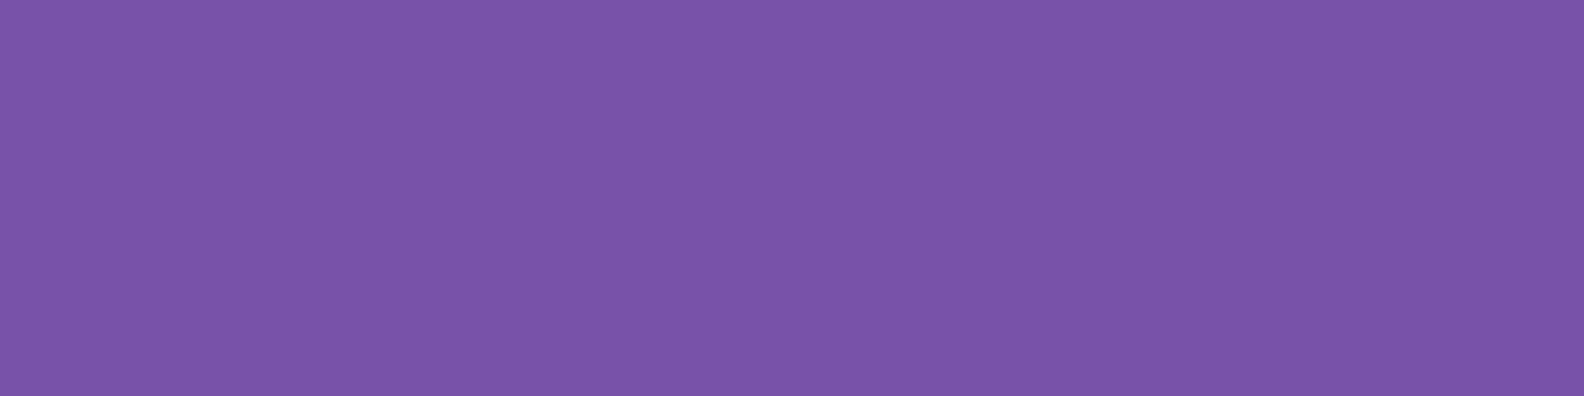 1584x396 Royal Purple Solid Color Background